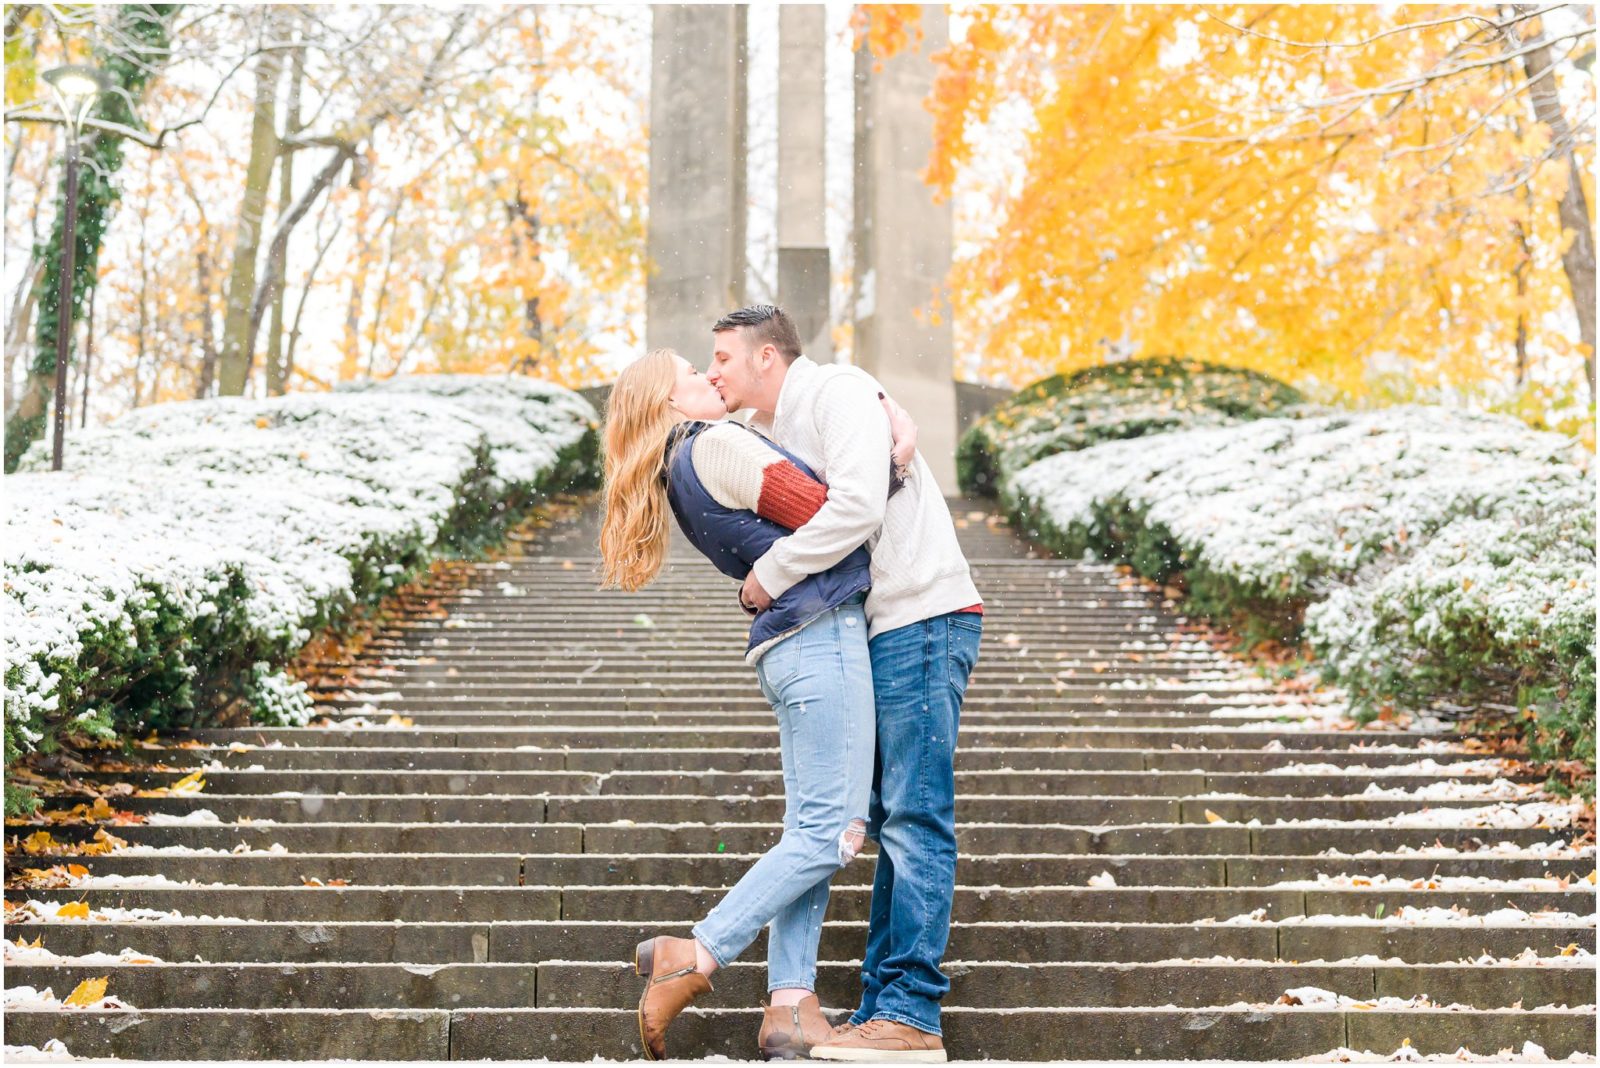 Dip kiss Holcomb Gardens engagement session in the snow